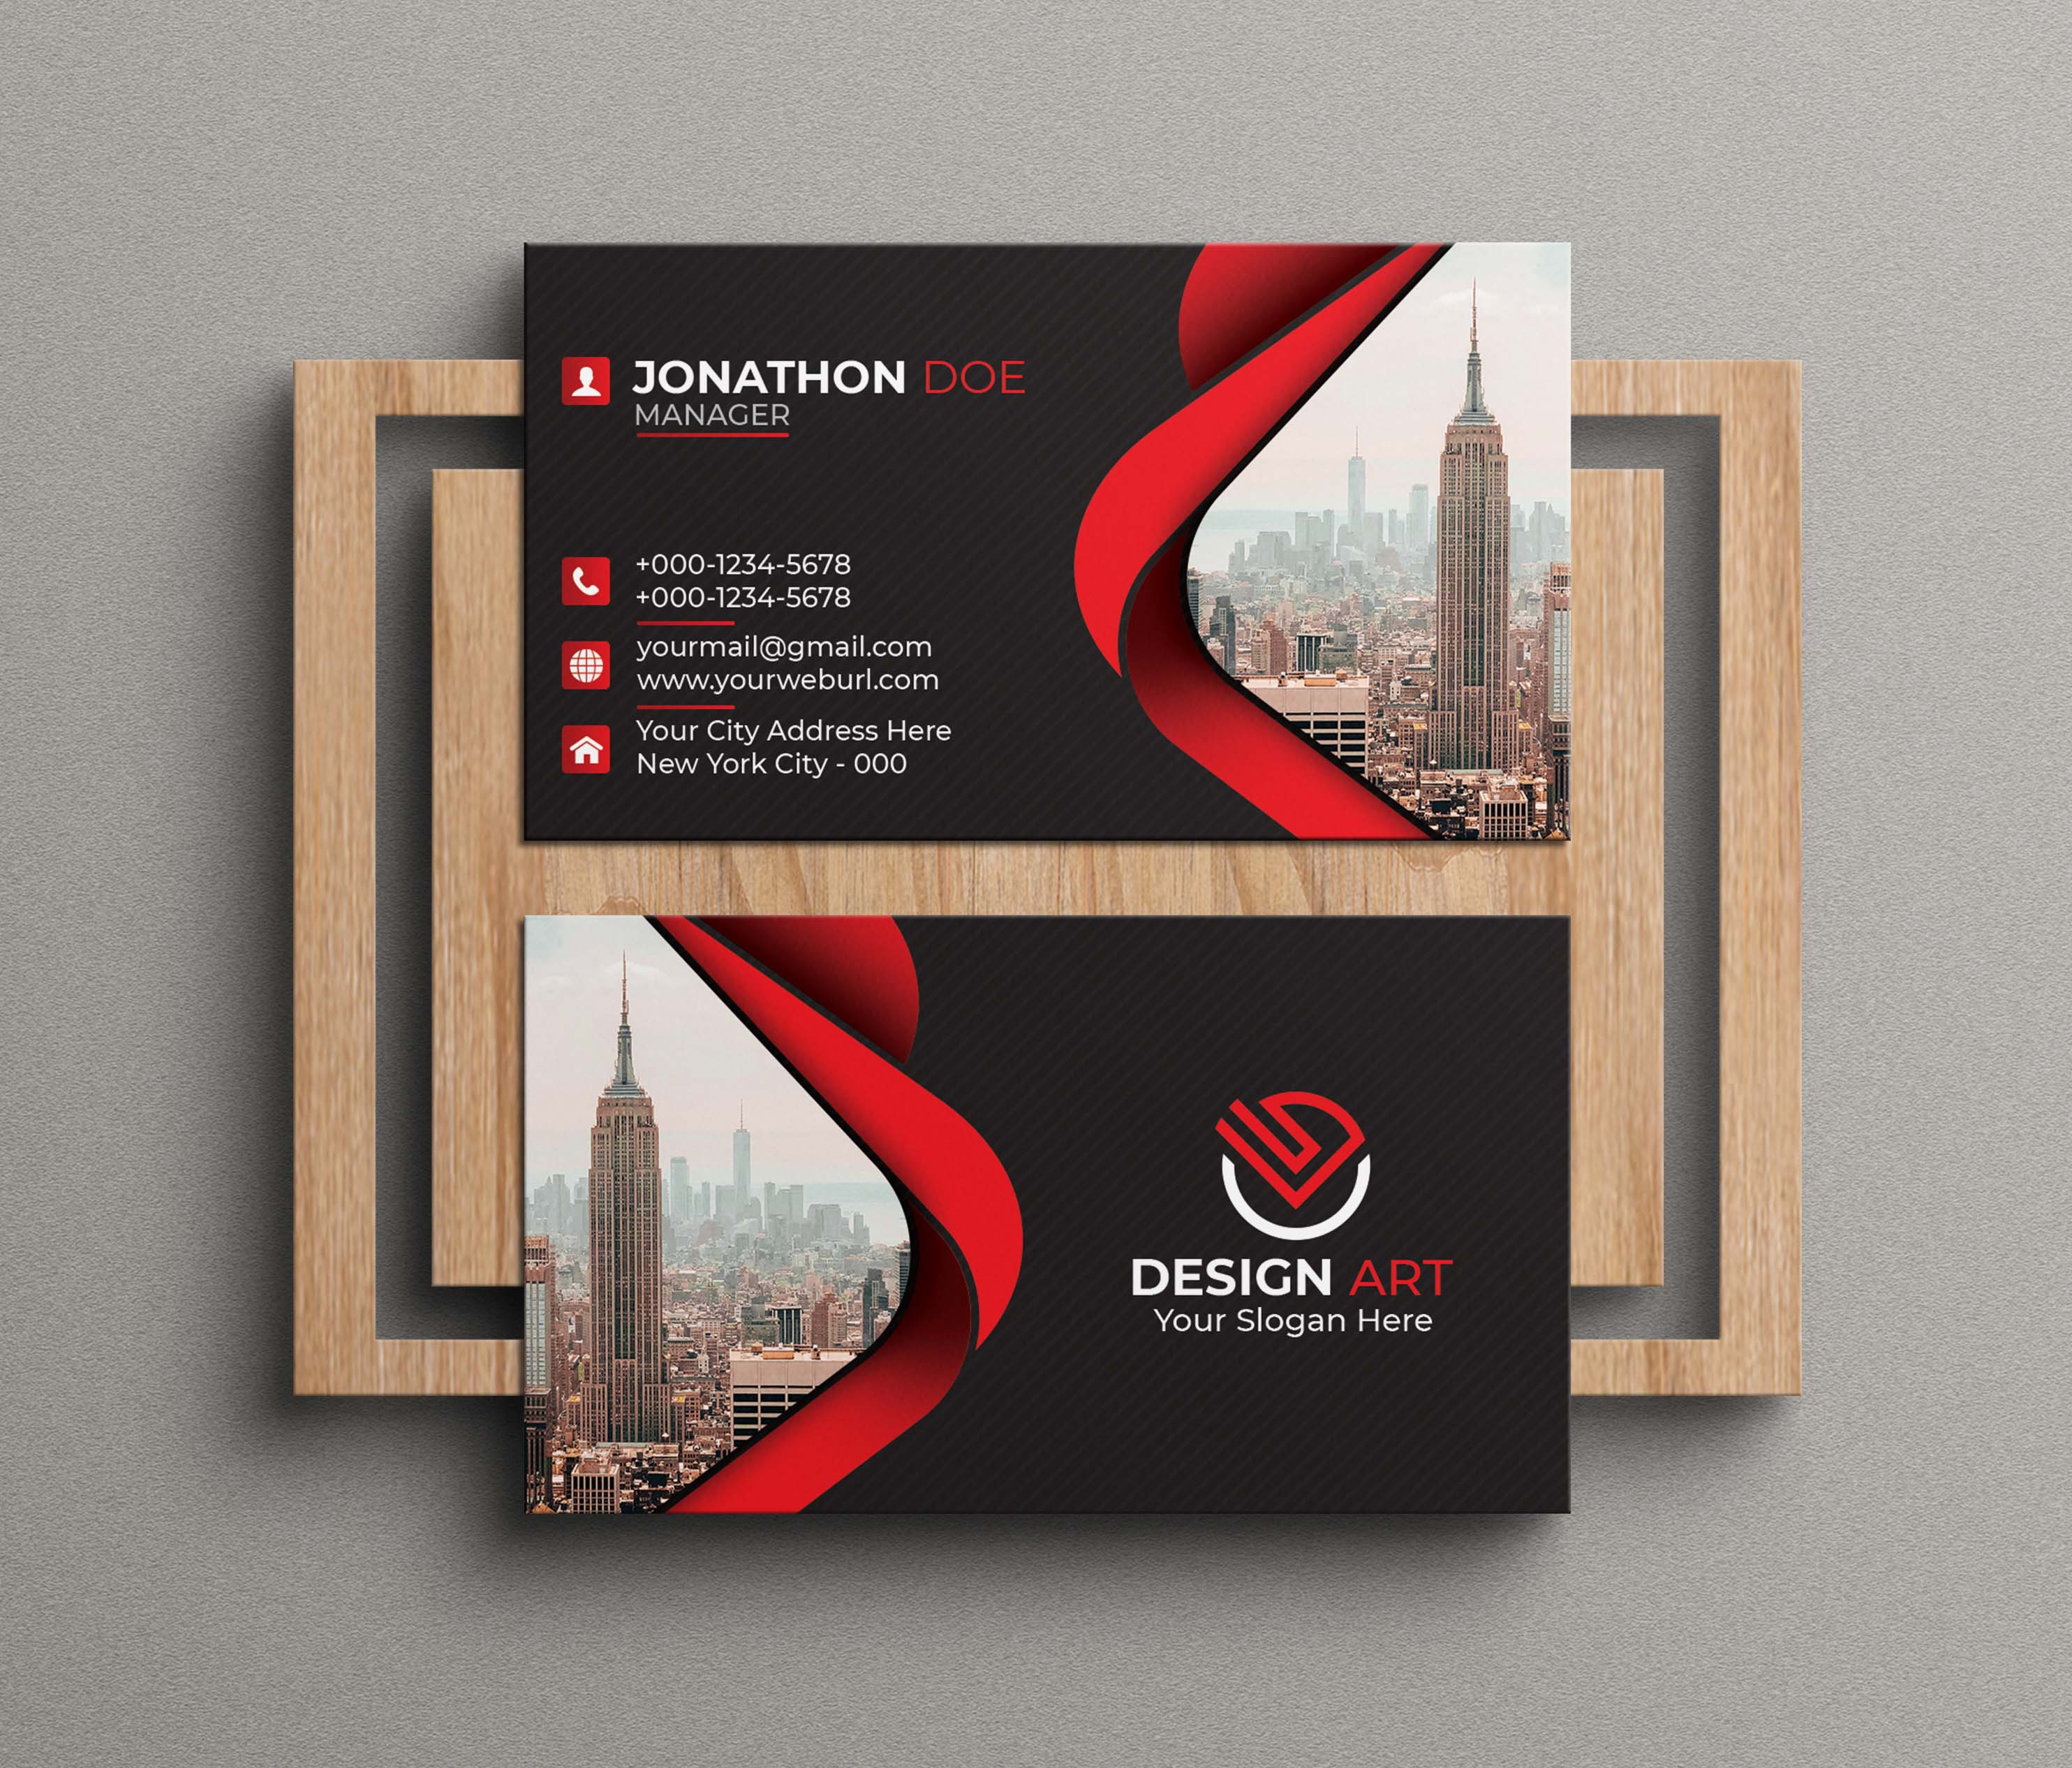 Two business cards with a red and black design.